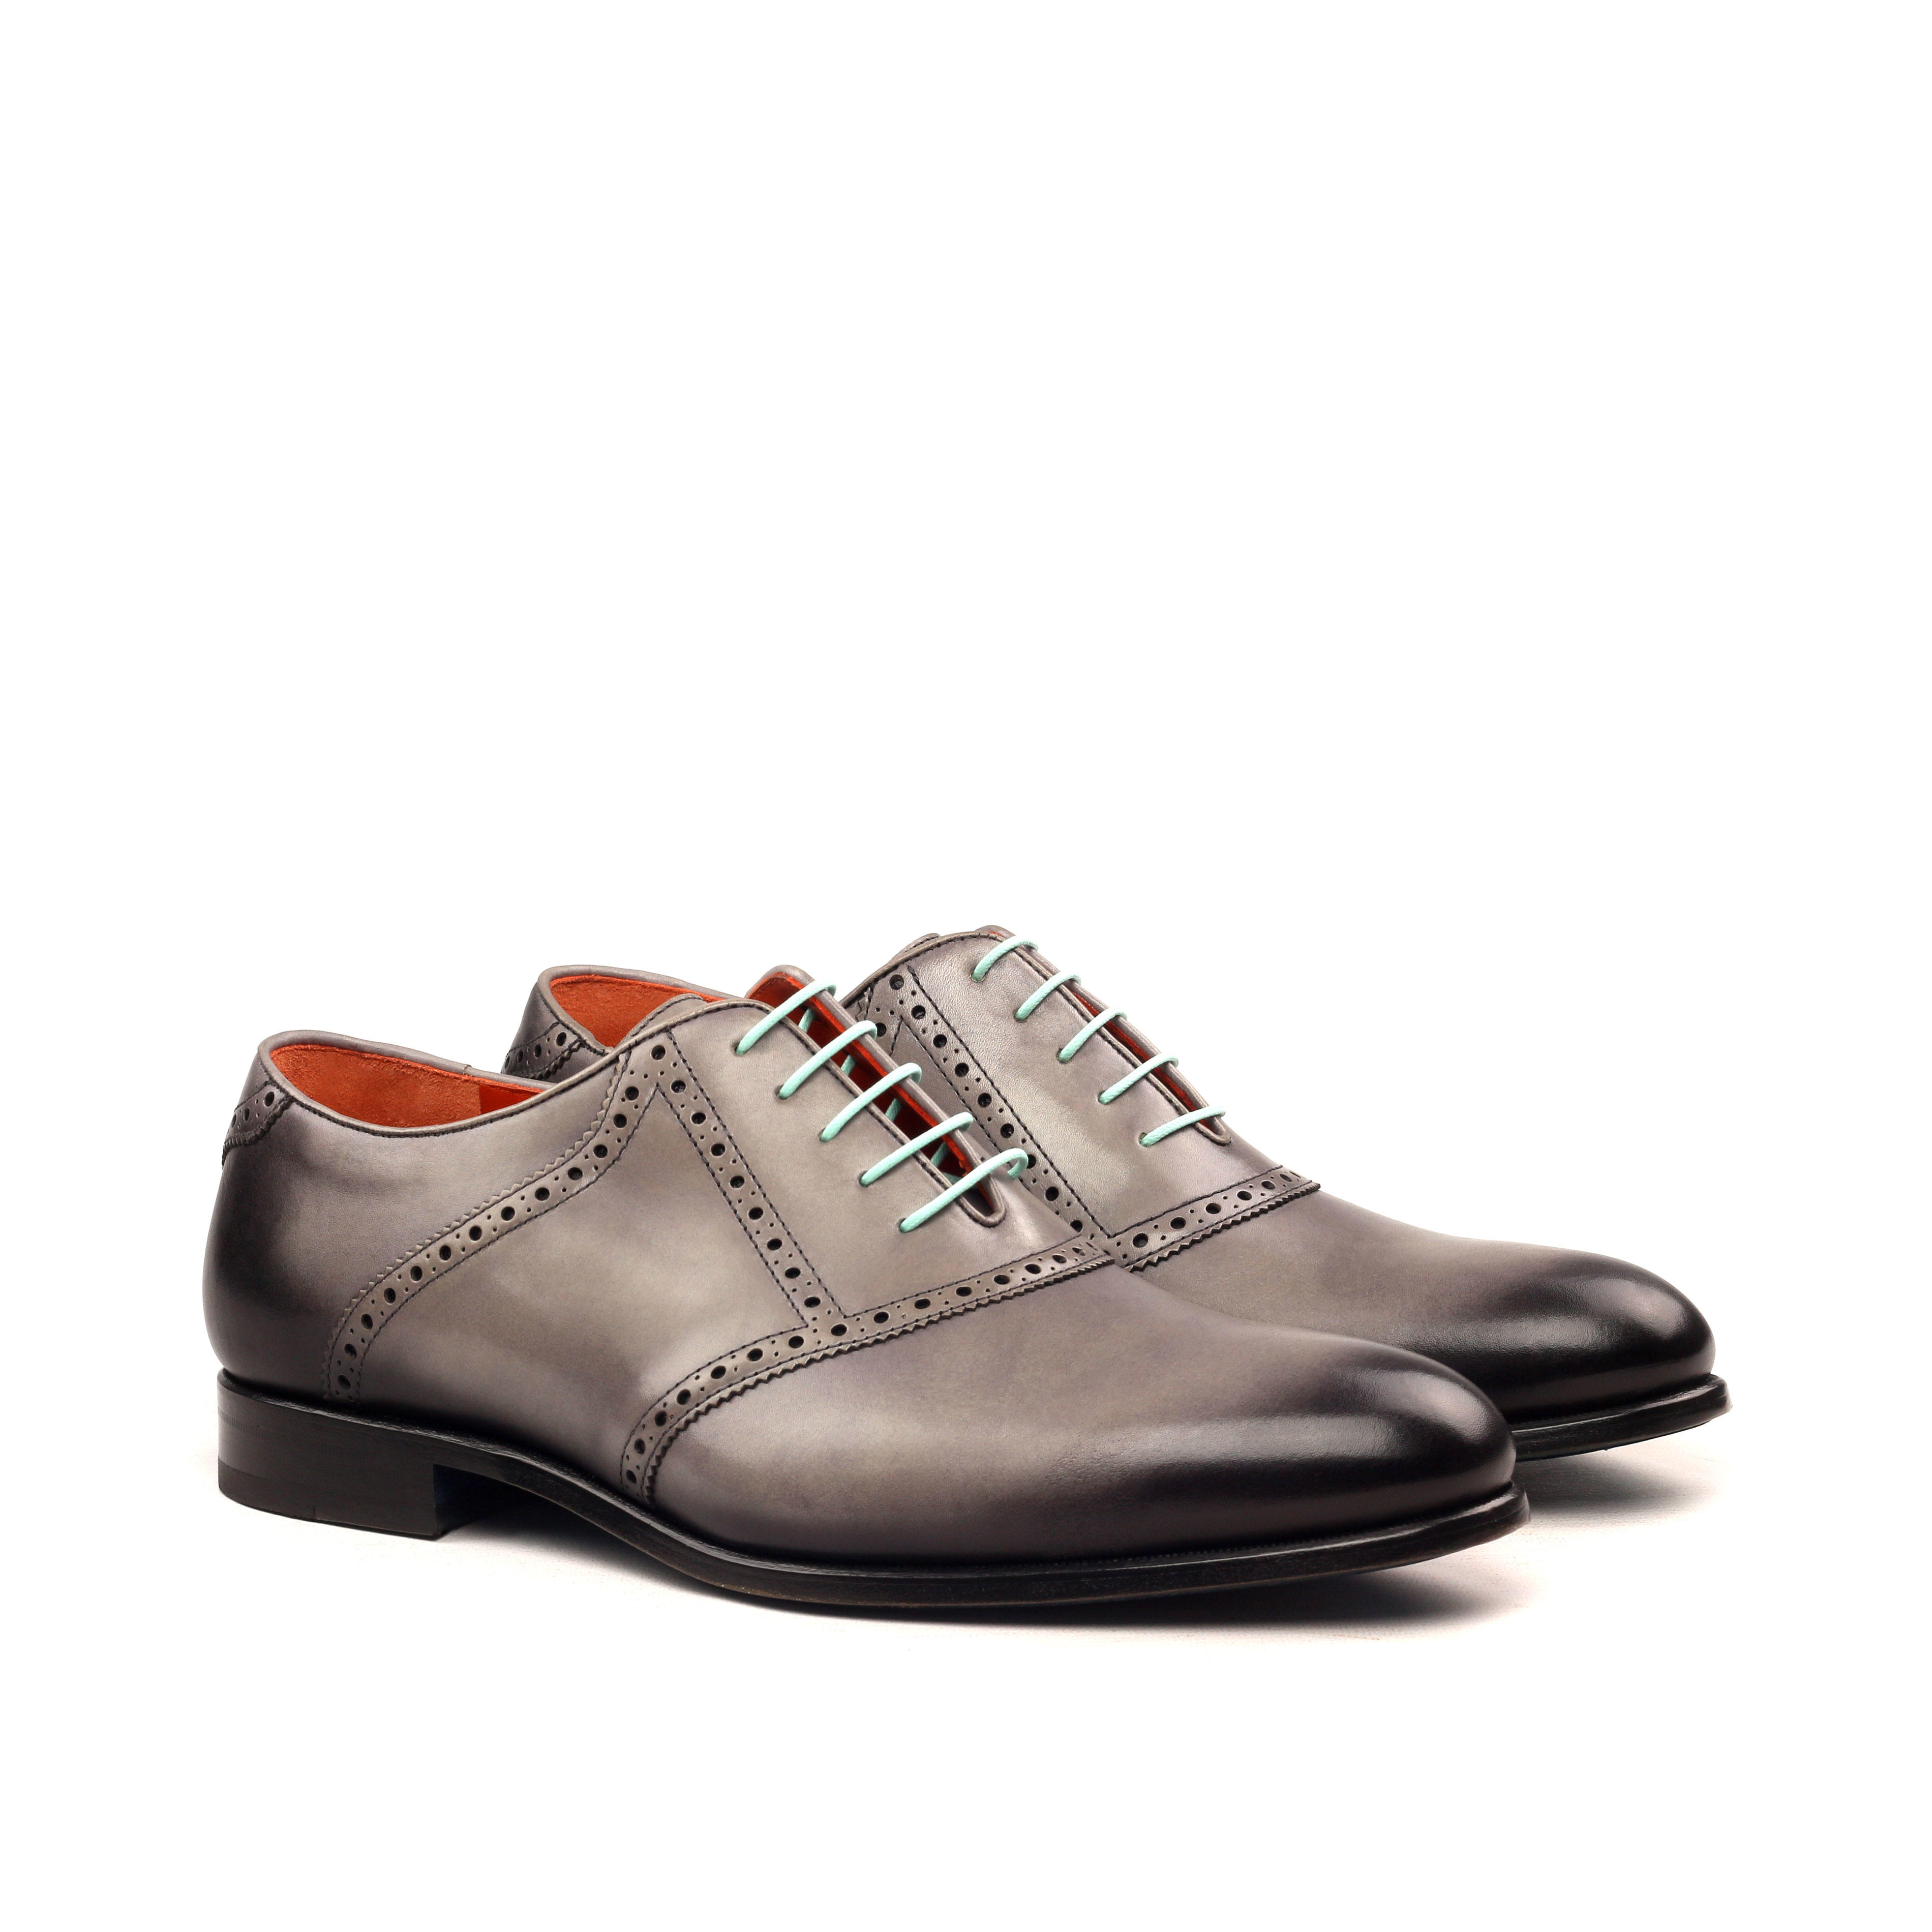 MANOR OF LONDON 'The Saddle' Burnished Painted Grey Calfskin Shoe Luxury Custom Initials Monogrammed Front Side View